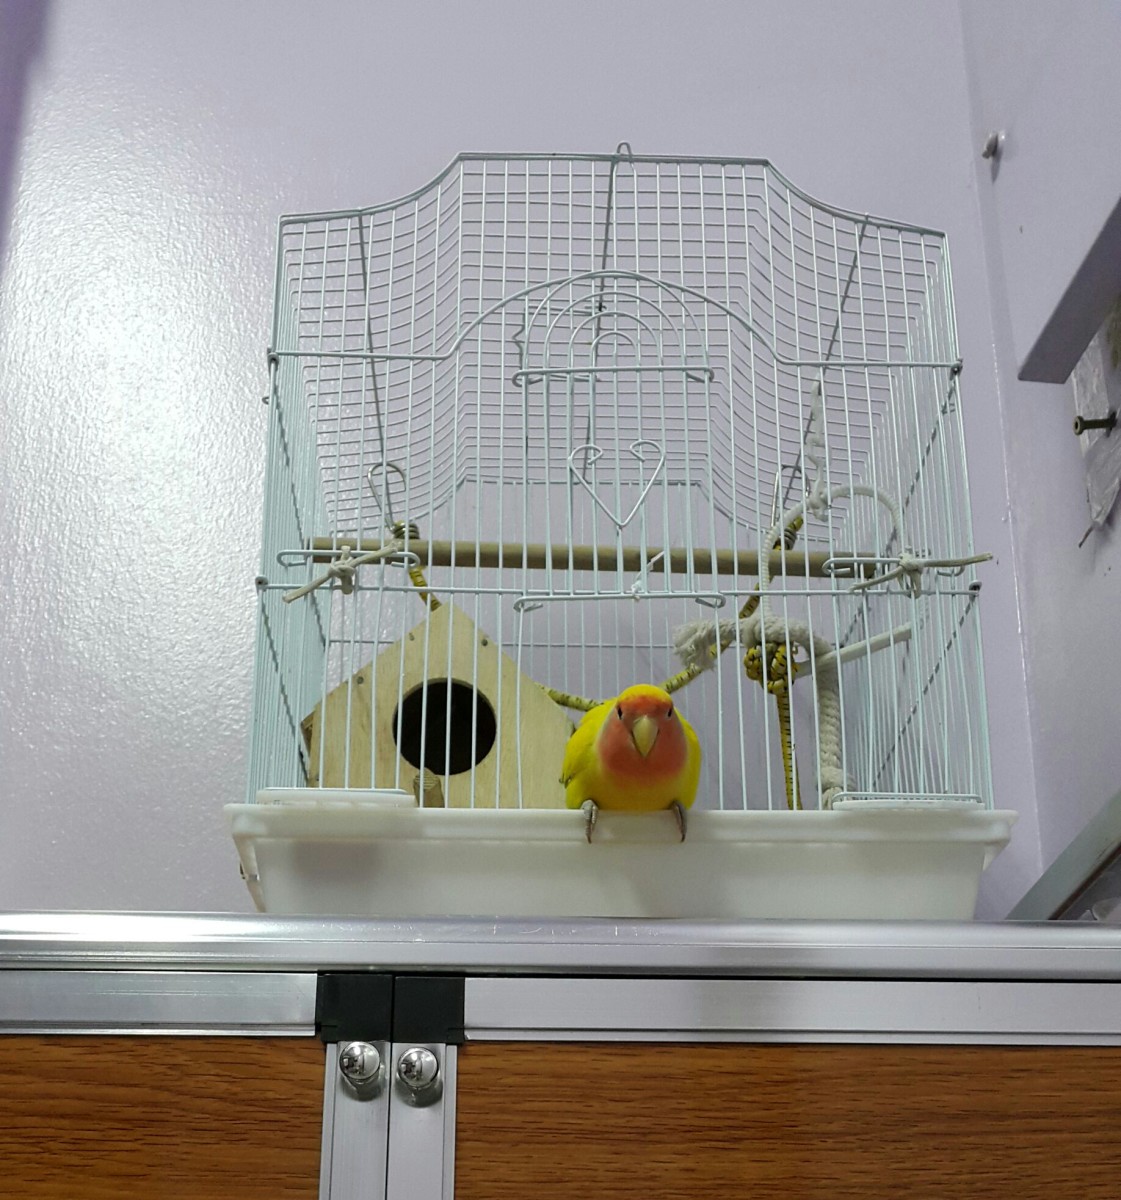 Lovebird Mumu waiting to jump out of his cage. 